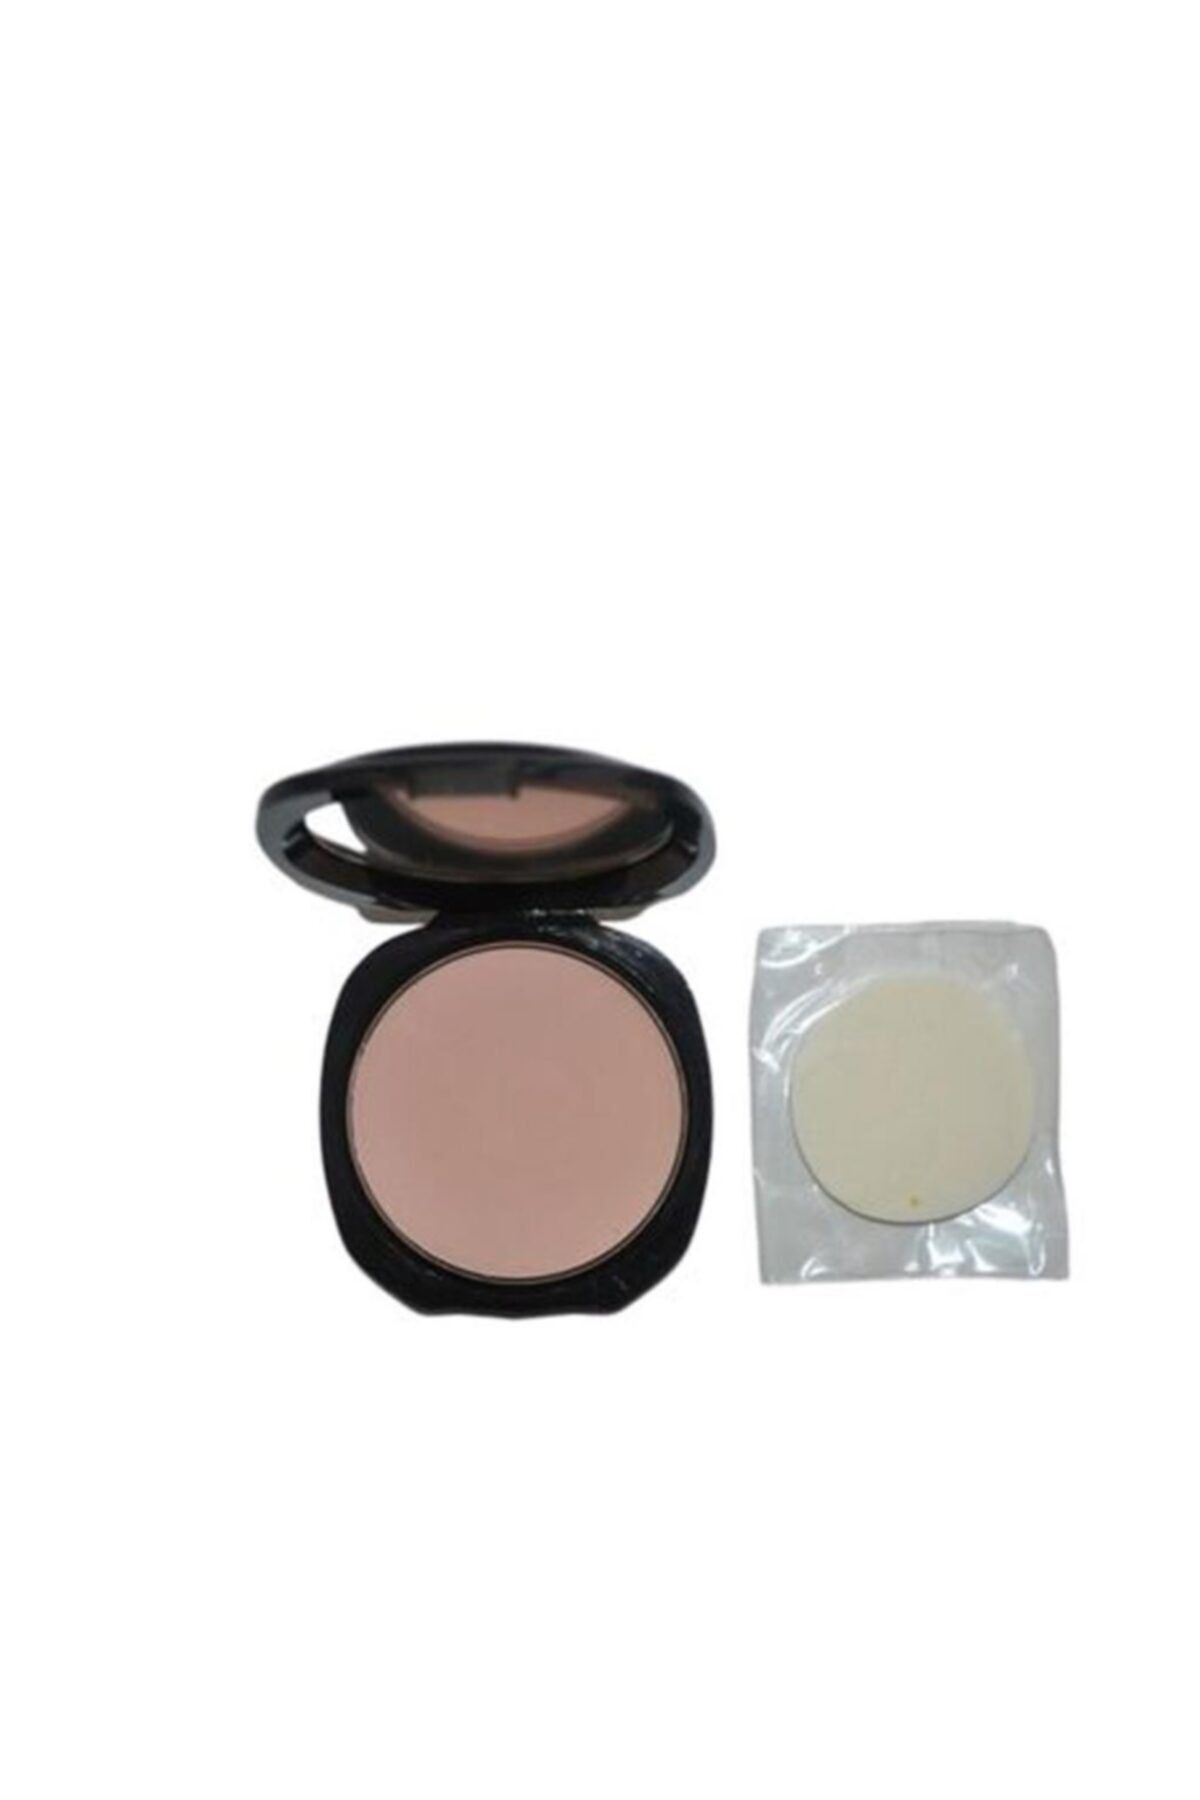 Catherine Arley Silky Touch Cream Compact 04